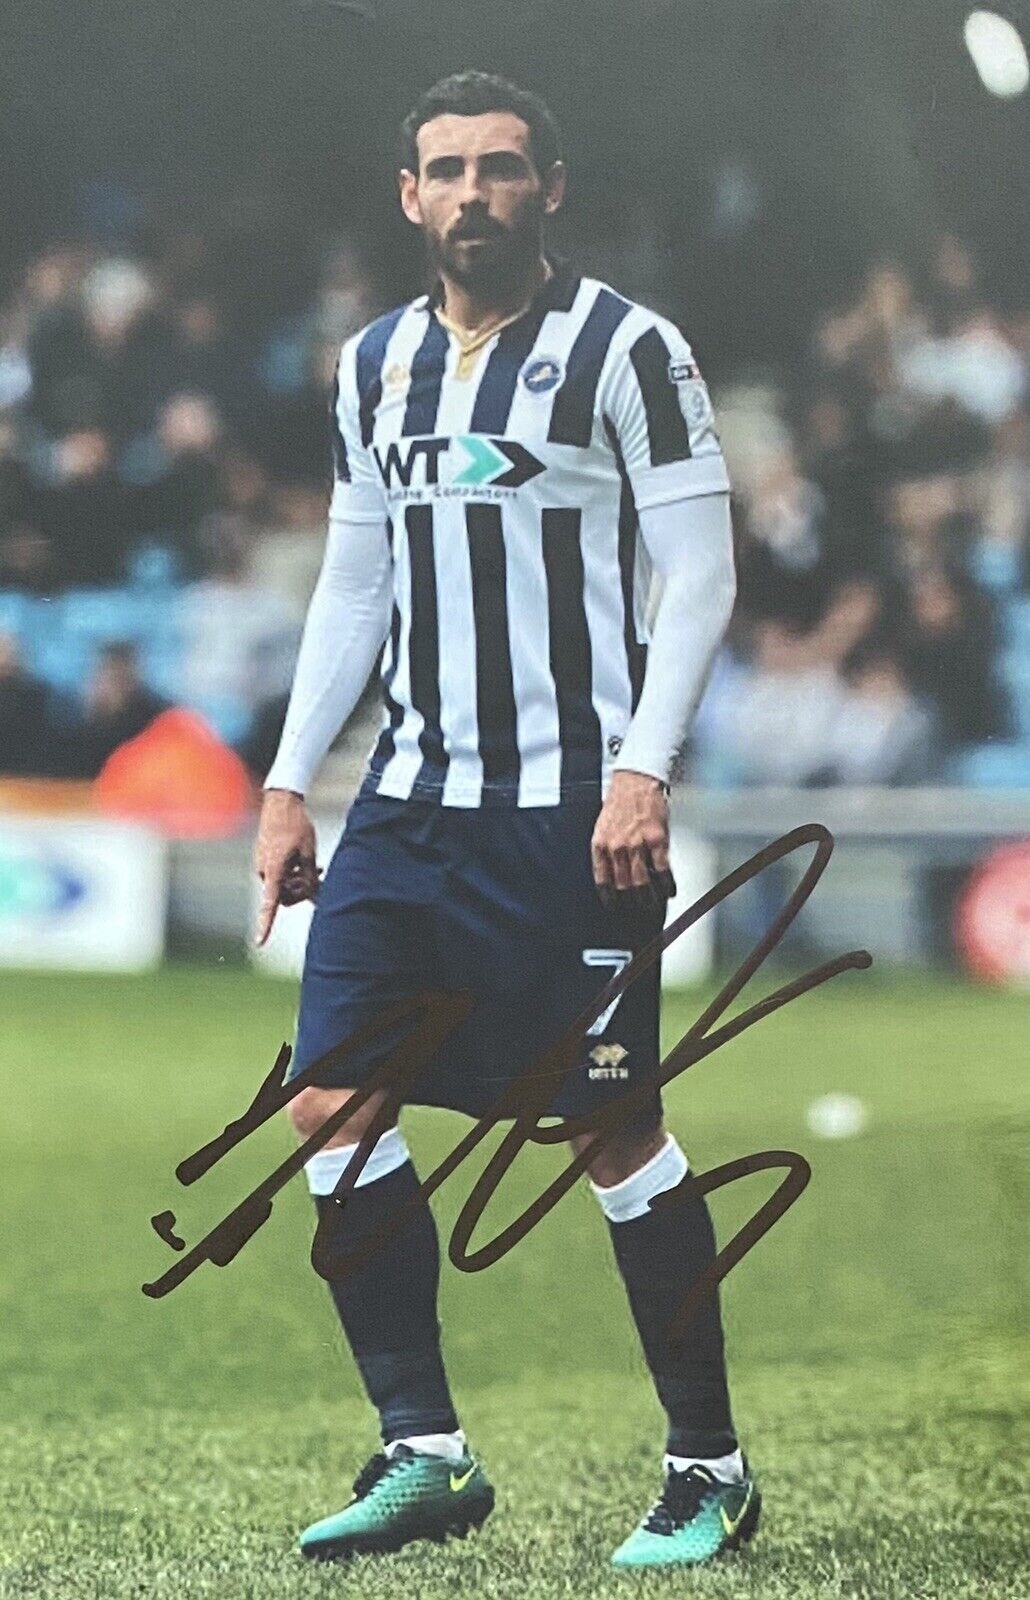 David Warrall Genuine Hand Millwall 6X4 Photo Poster painting